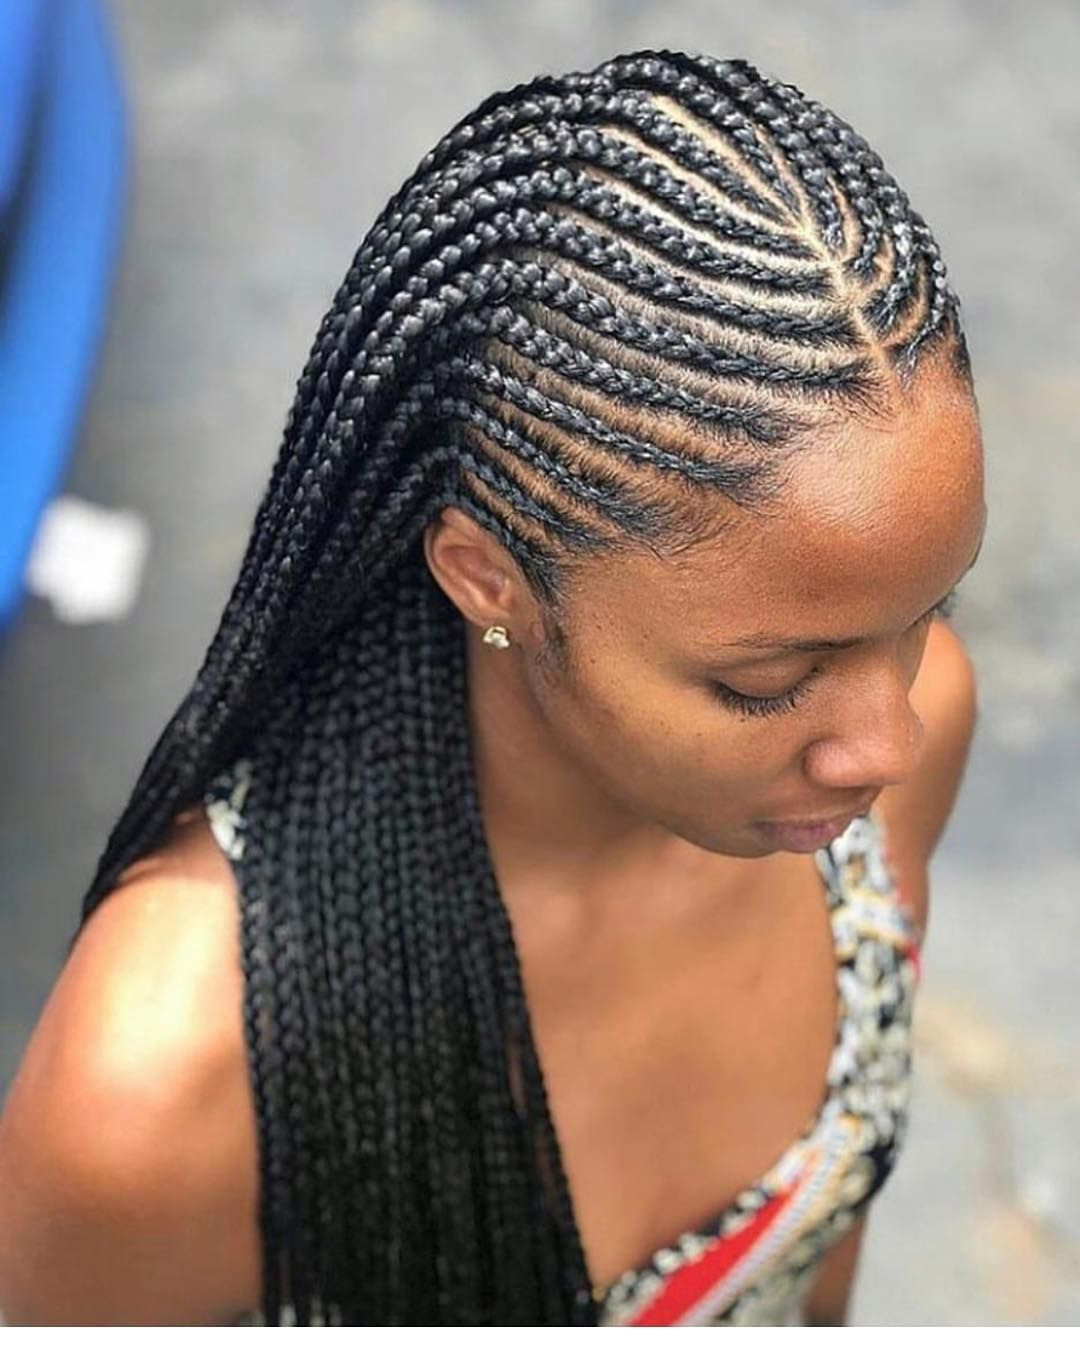 Braided Hairstyles
 35 Lemonade Braids Styles for Elegant Protective Styling